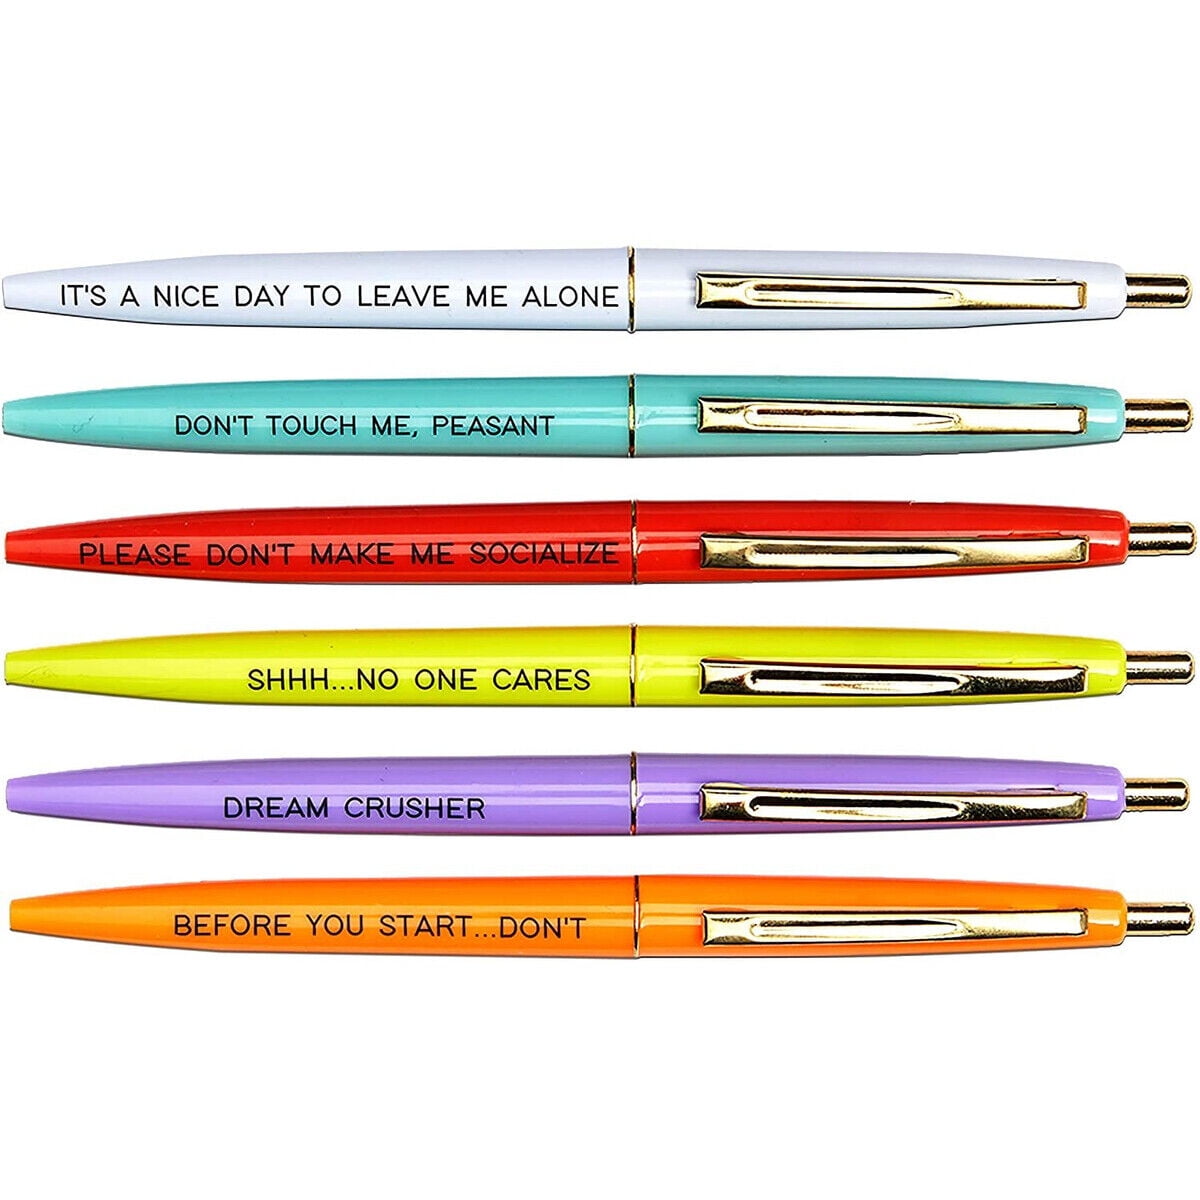 Ballpoint Pens Medium Point 1.0MM with Funny Quotes and Insults